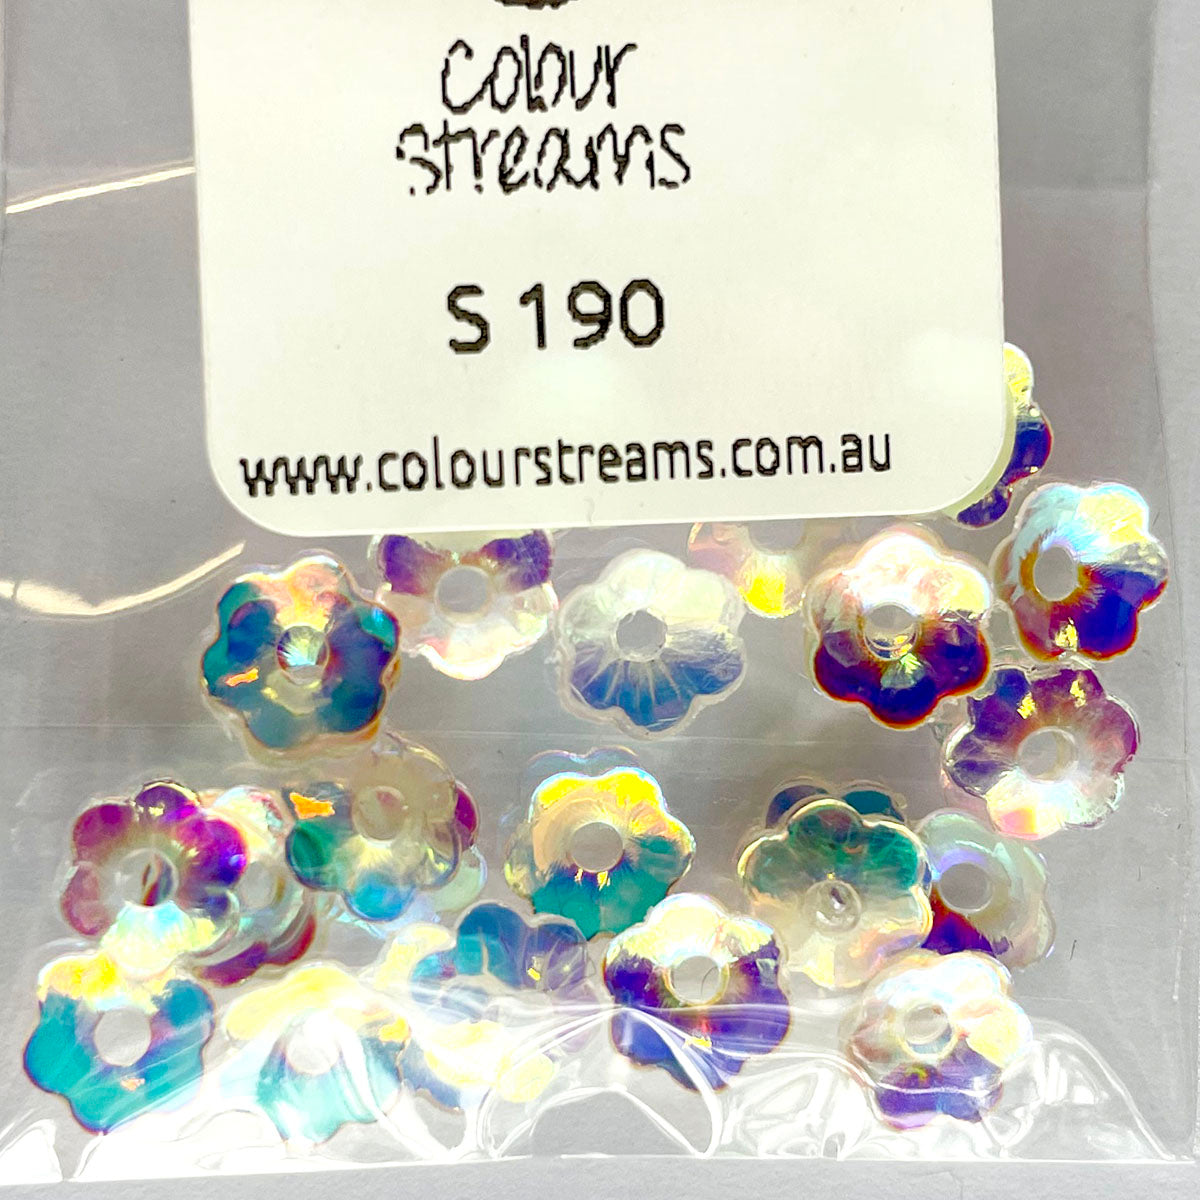 www.colourstreams.com.au Colour Streams Sequins Stitching Embroidery Embellishments Costumes Mardi Gras Dancing Ballet Theatre Shows Drag Queen Bling FlowerPearl with Multi Lights Reflective Iridescent 7mm (S190) 